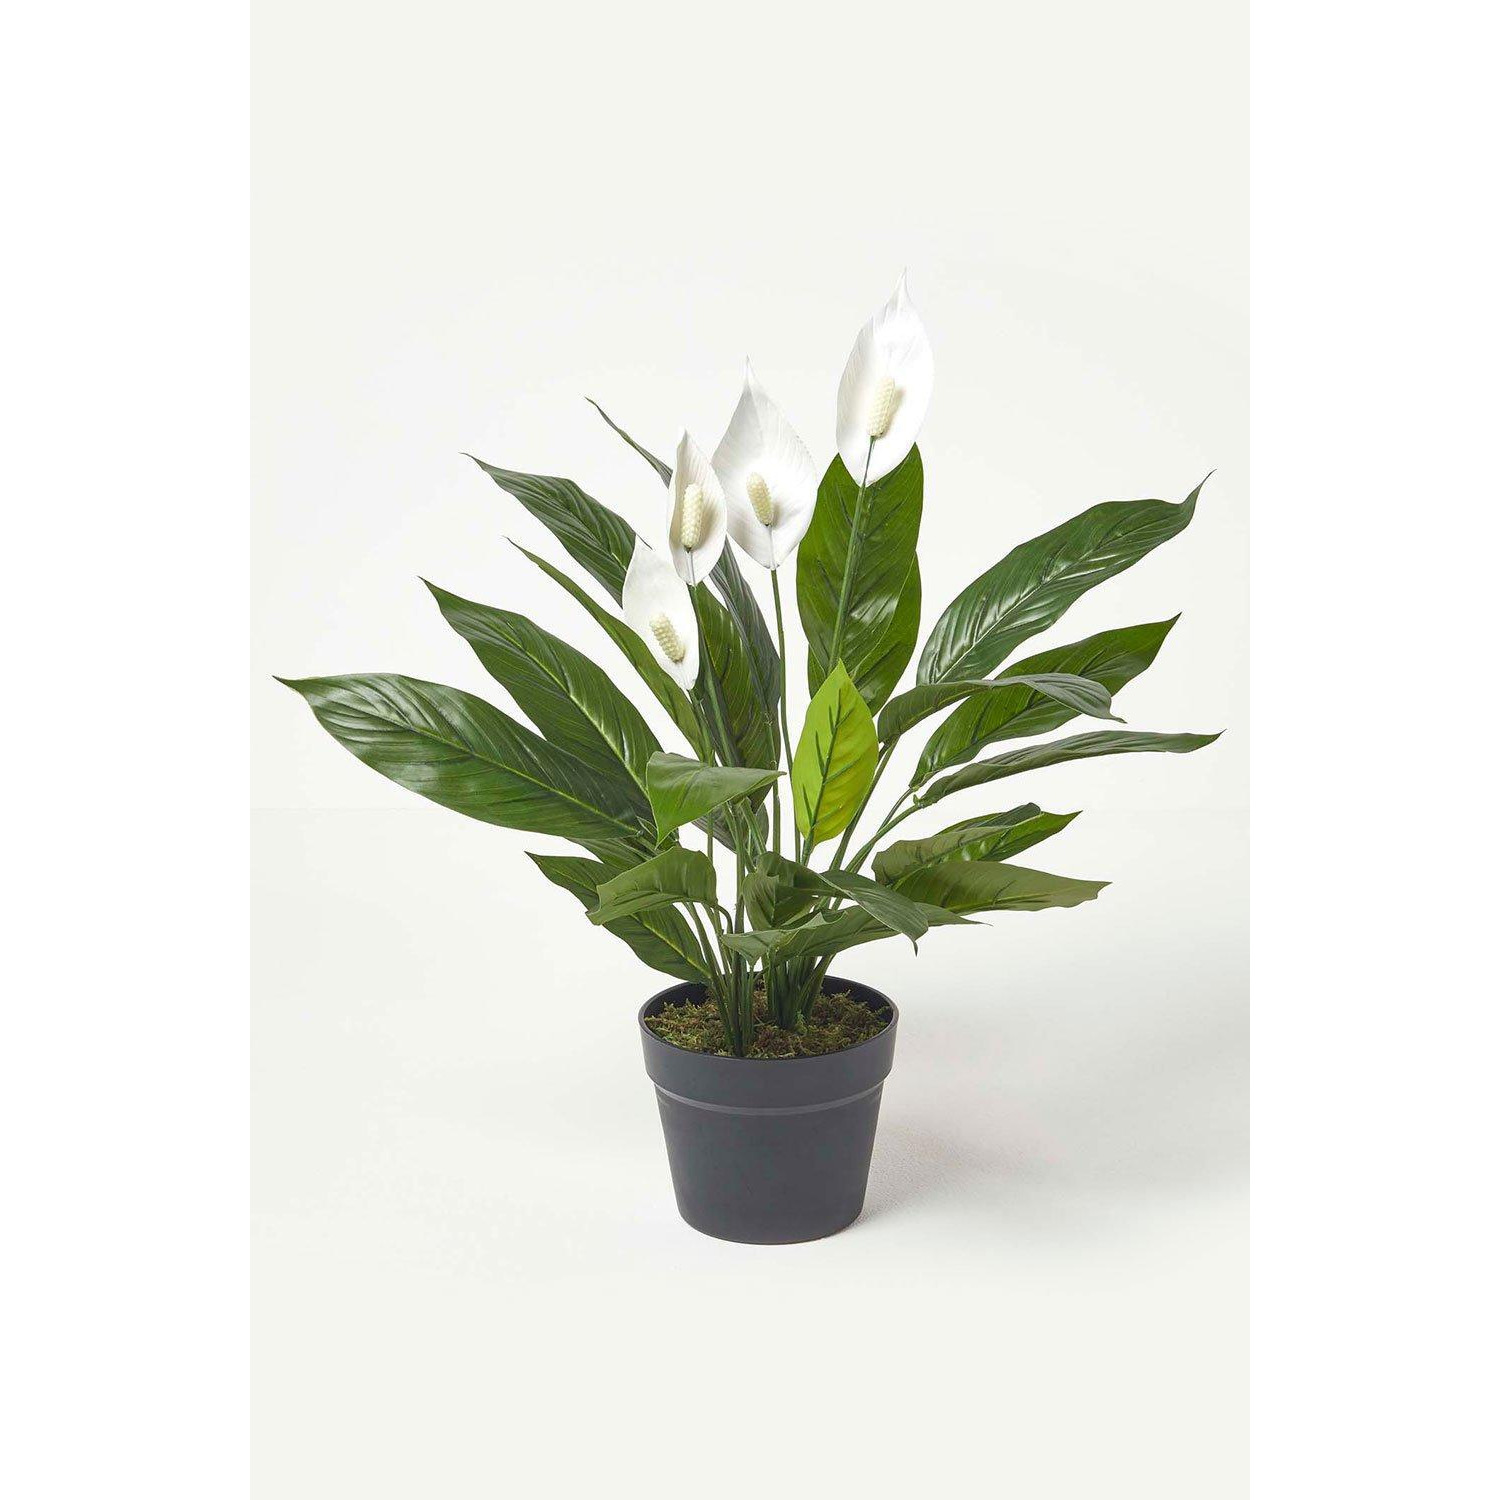 White Peace Lily in Pot, 60 cm Tall - image 1